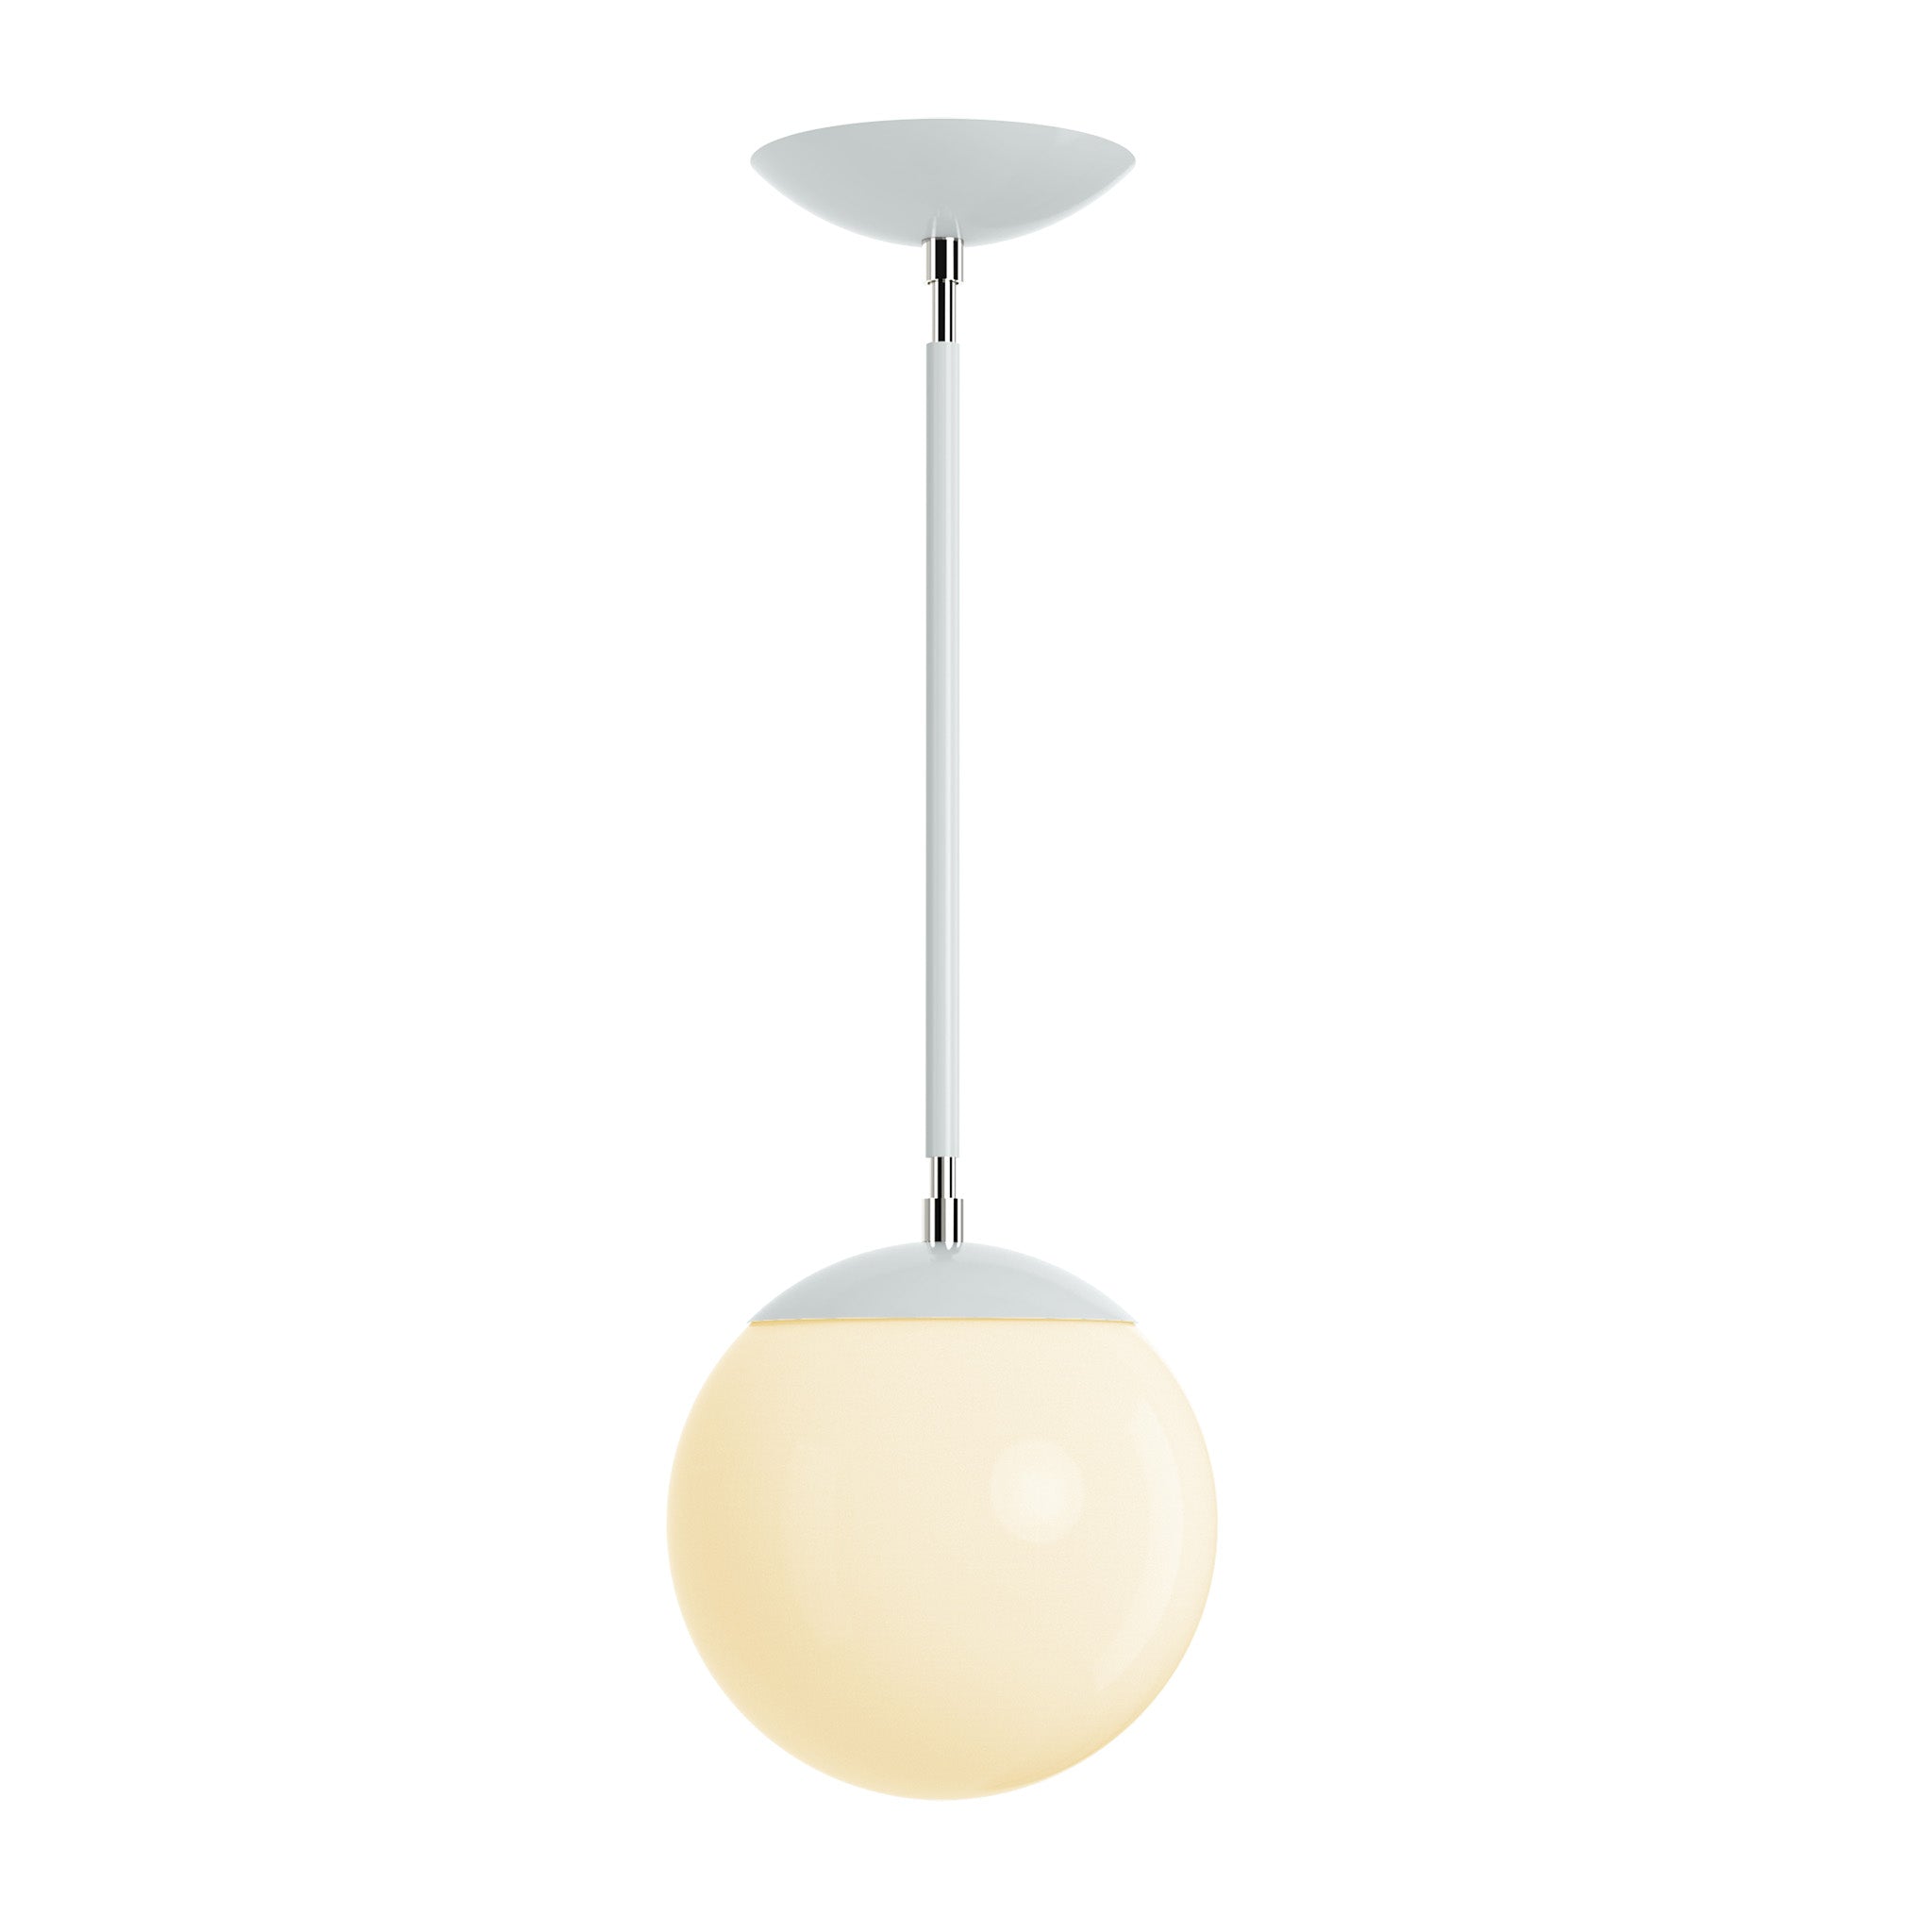 Polished nickel and chalk cap globe pendant 8" dutton brown lighting